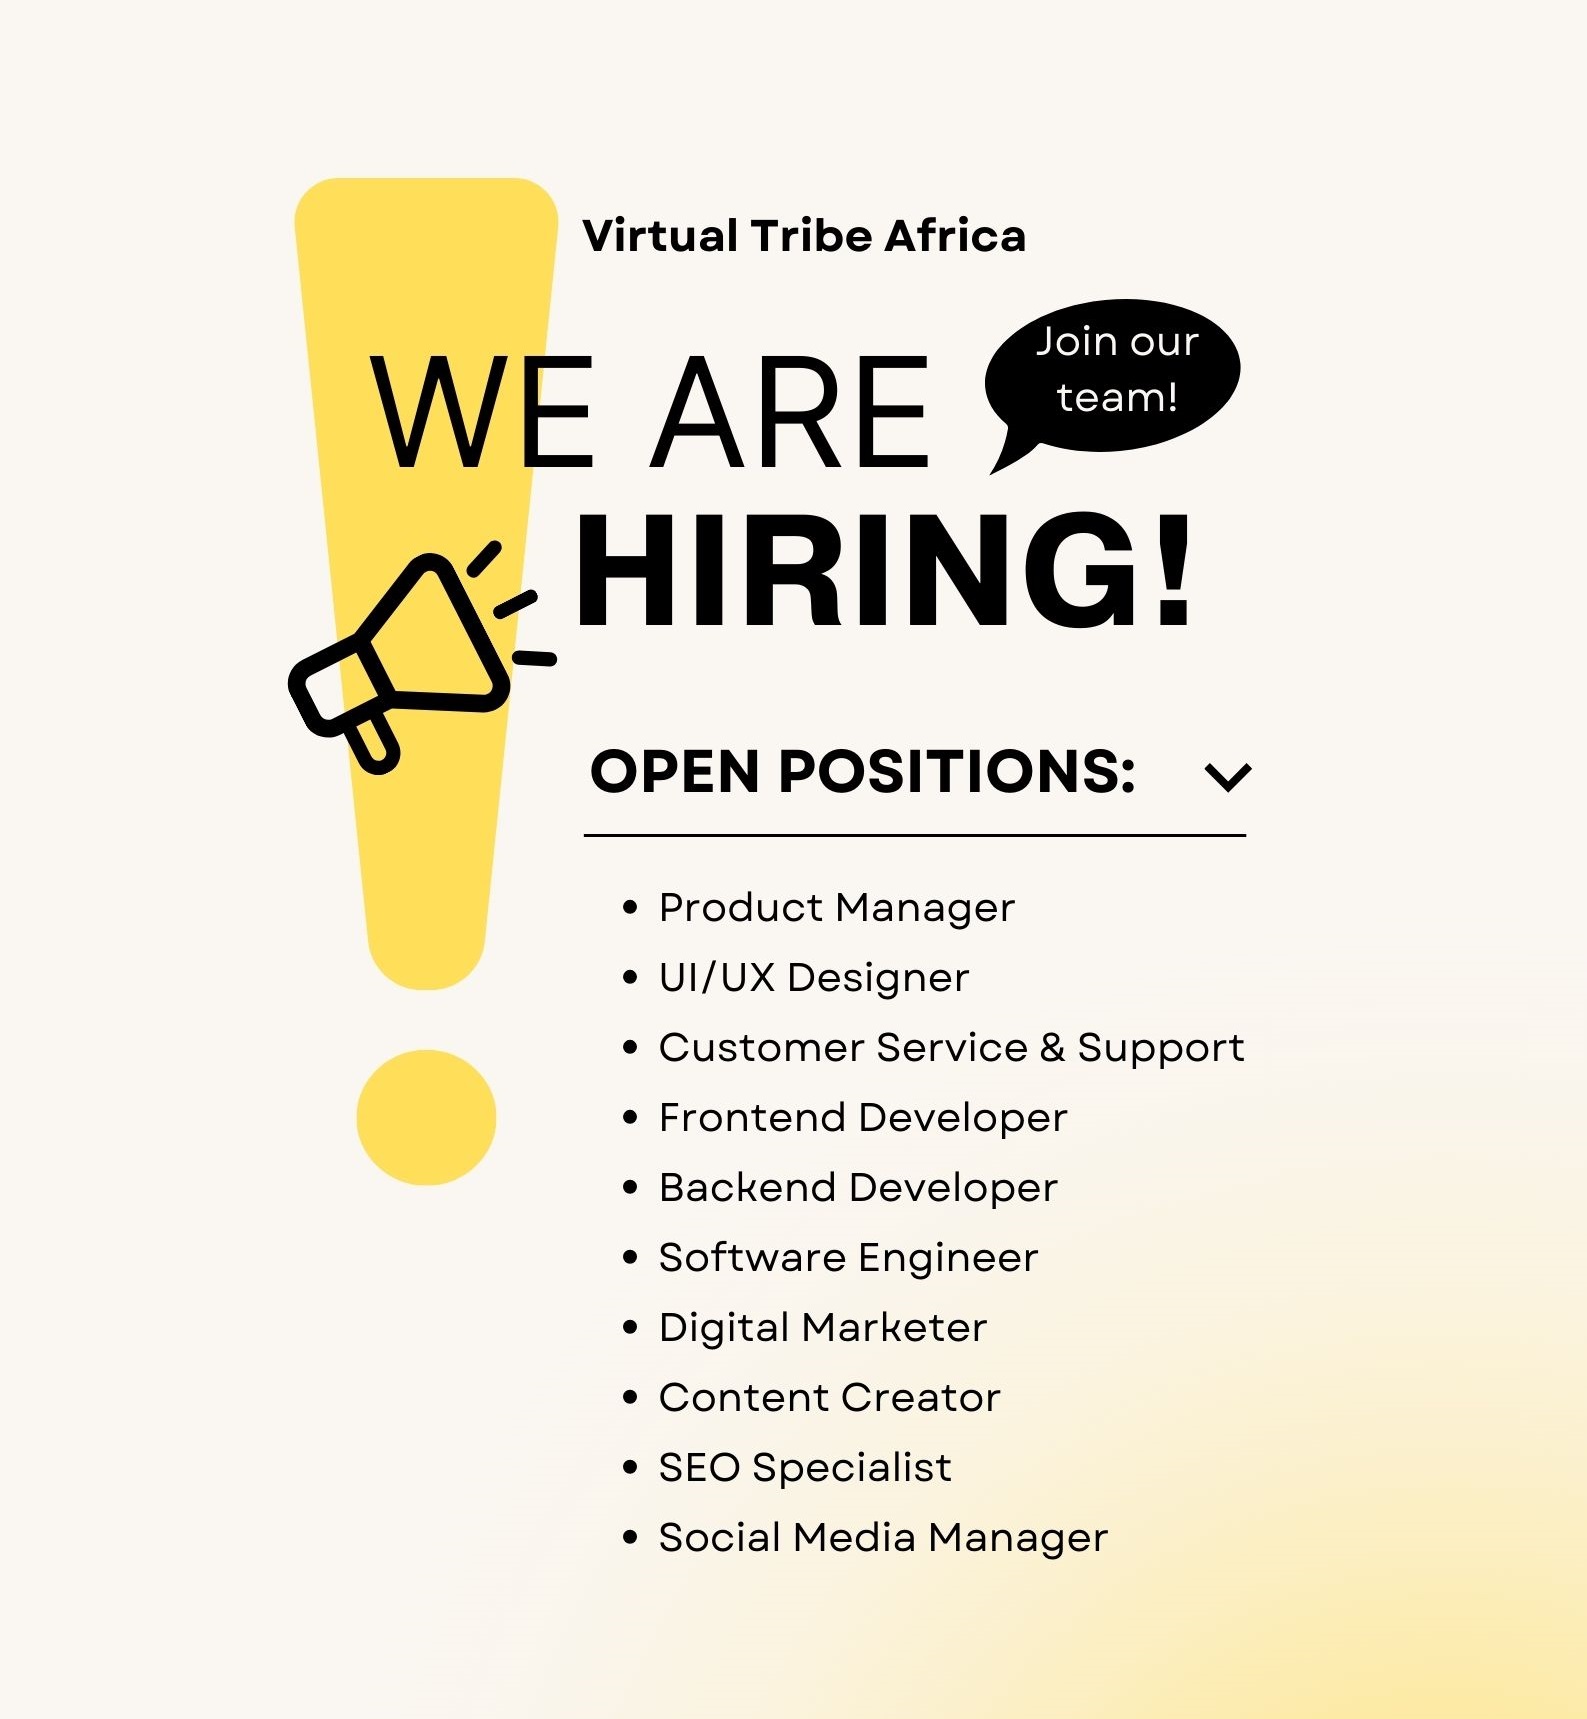 Digital Marketing Specialists Needed at Virtual Tribe Africa